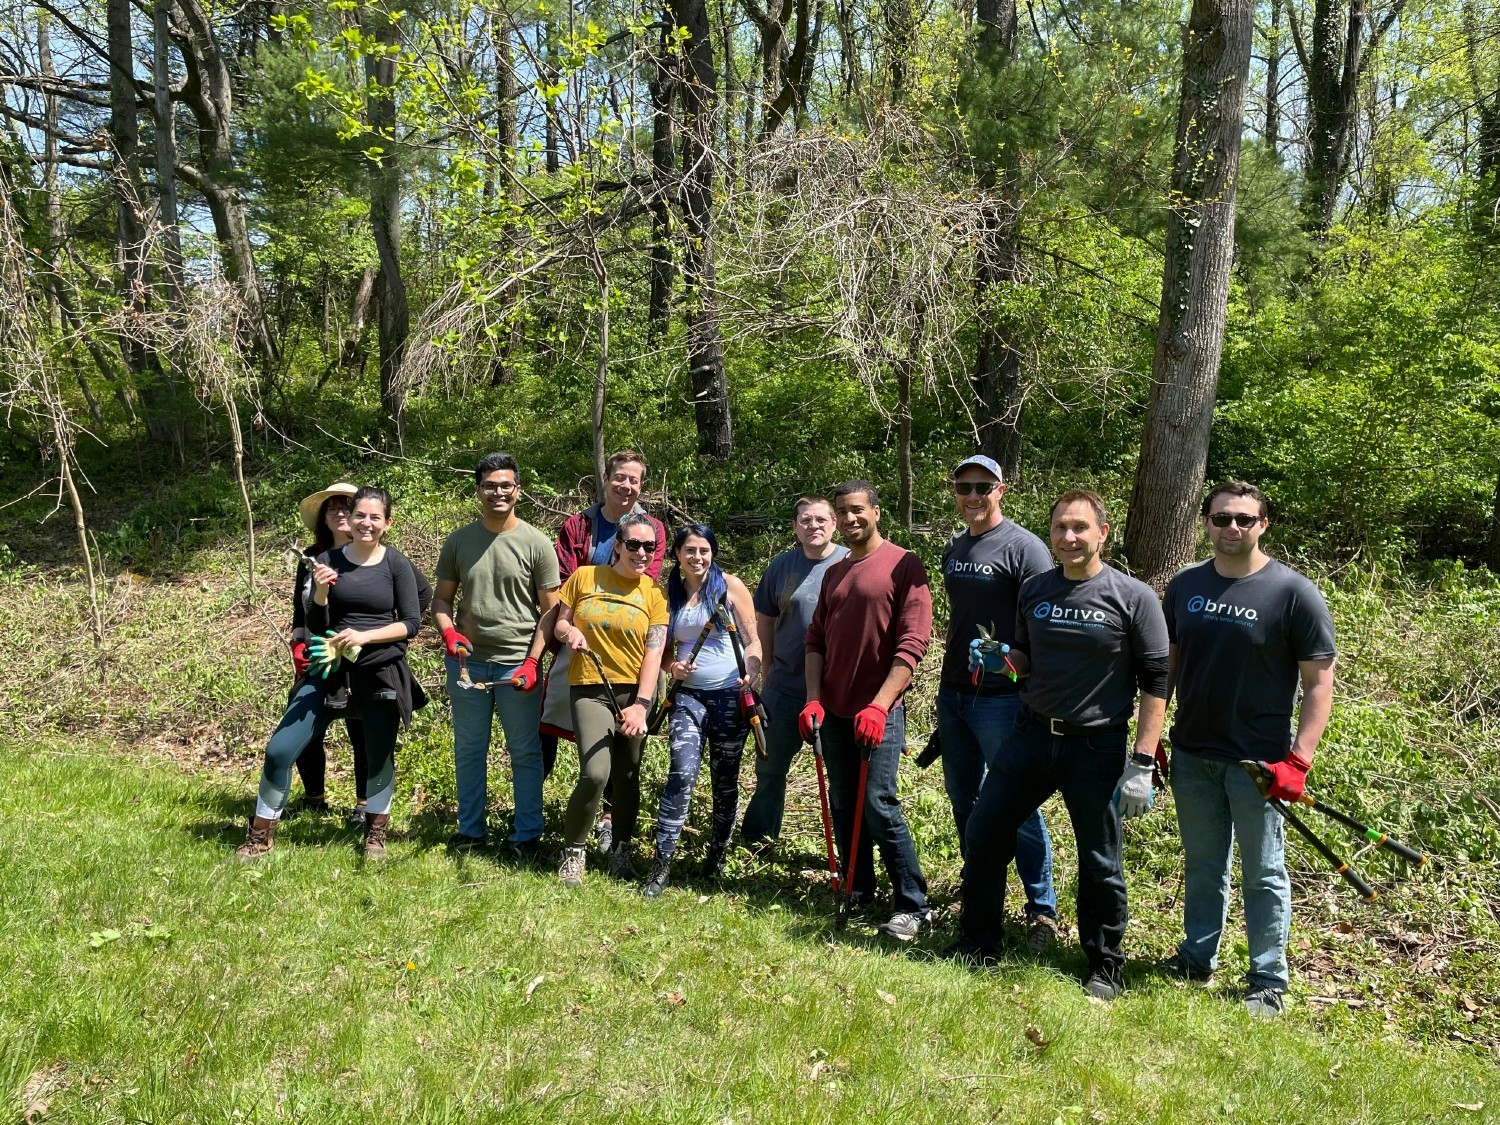 Volunteering for habitat restoration at Little Falls Park in Bethesda, MD in honor of Earth Day